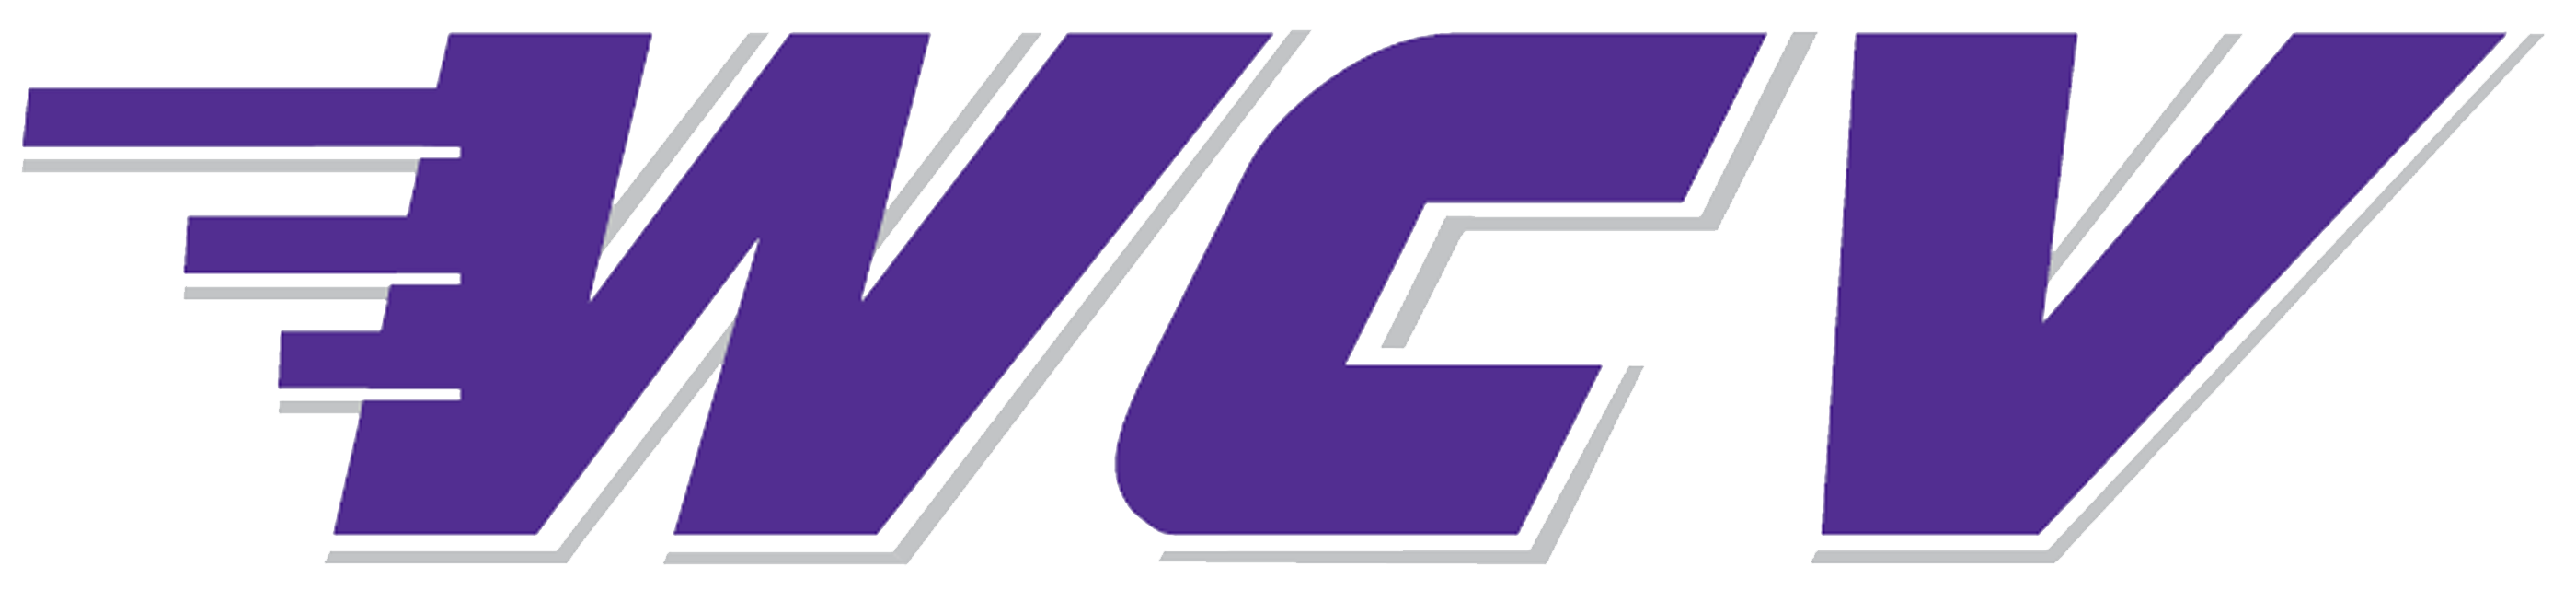 West Canada Valley logo of WCV in stylized purple font